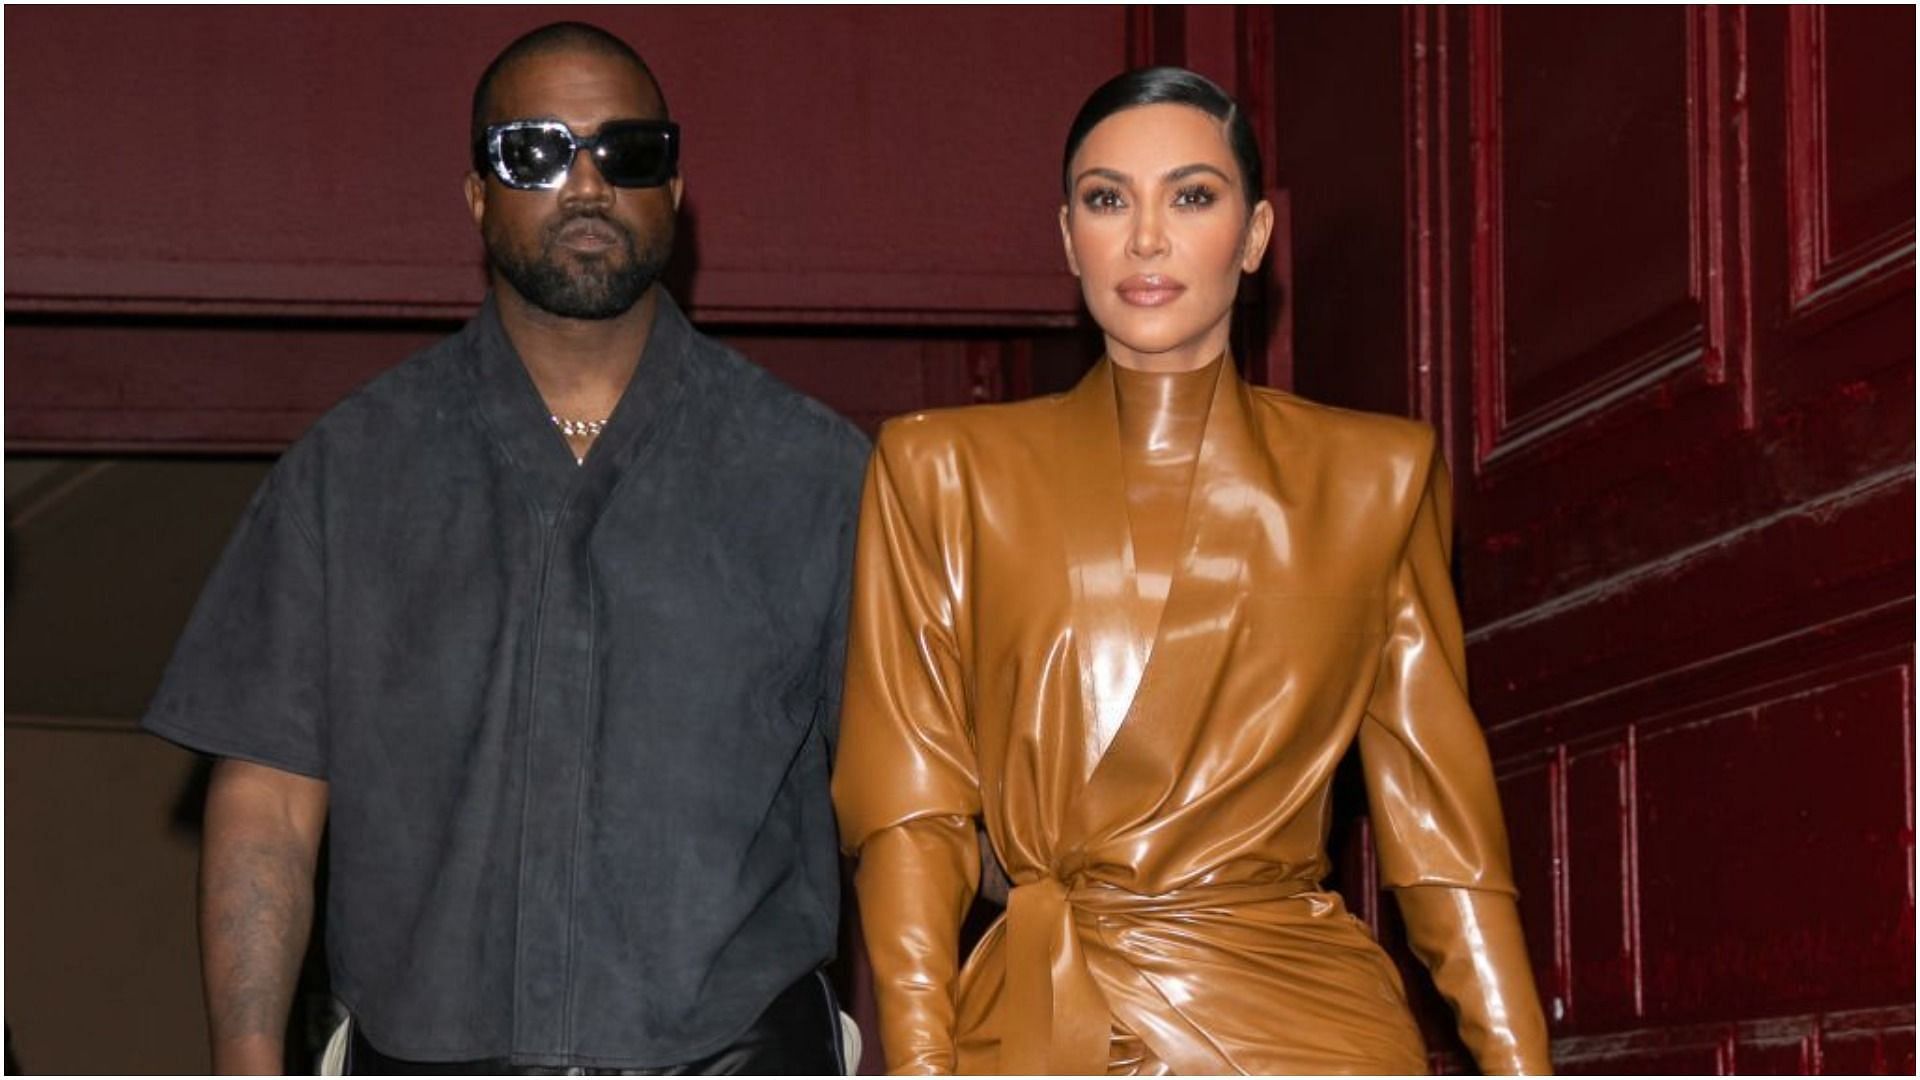 Kanye West and Kim Kardashian separated in 2021 (Image via Marc Piasecki/Getty Images)